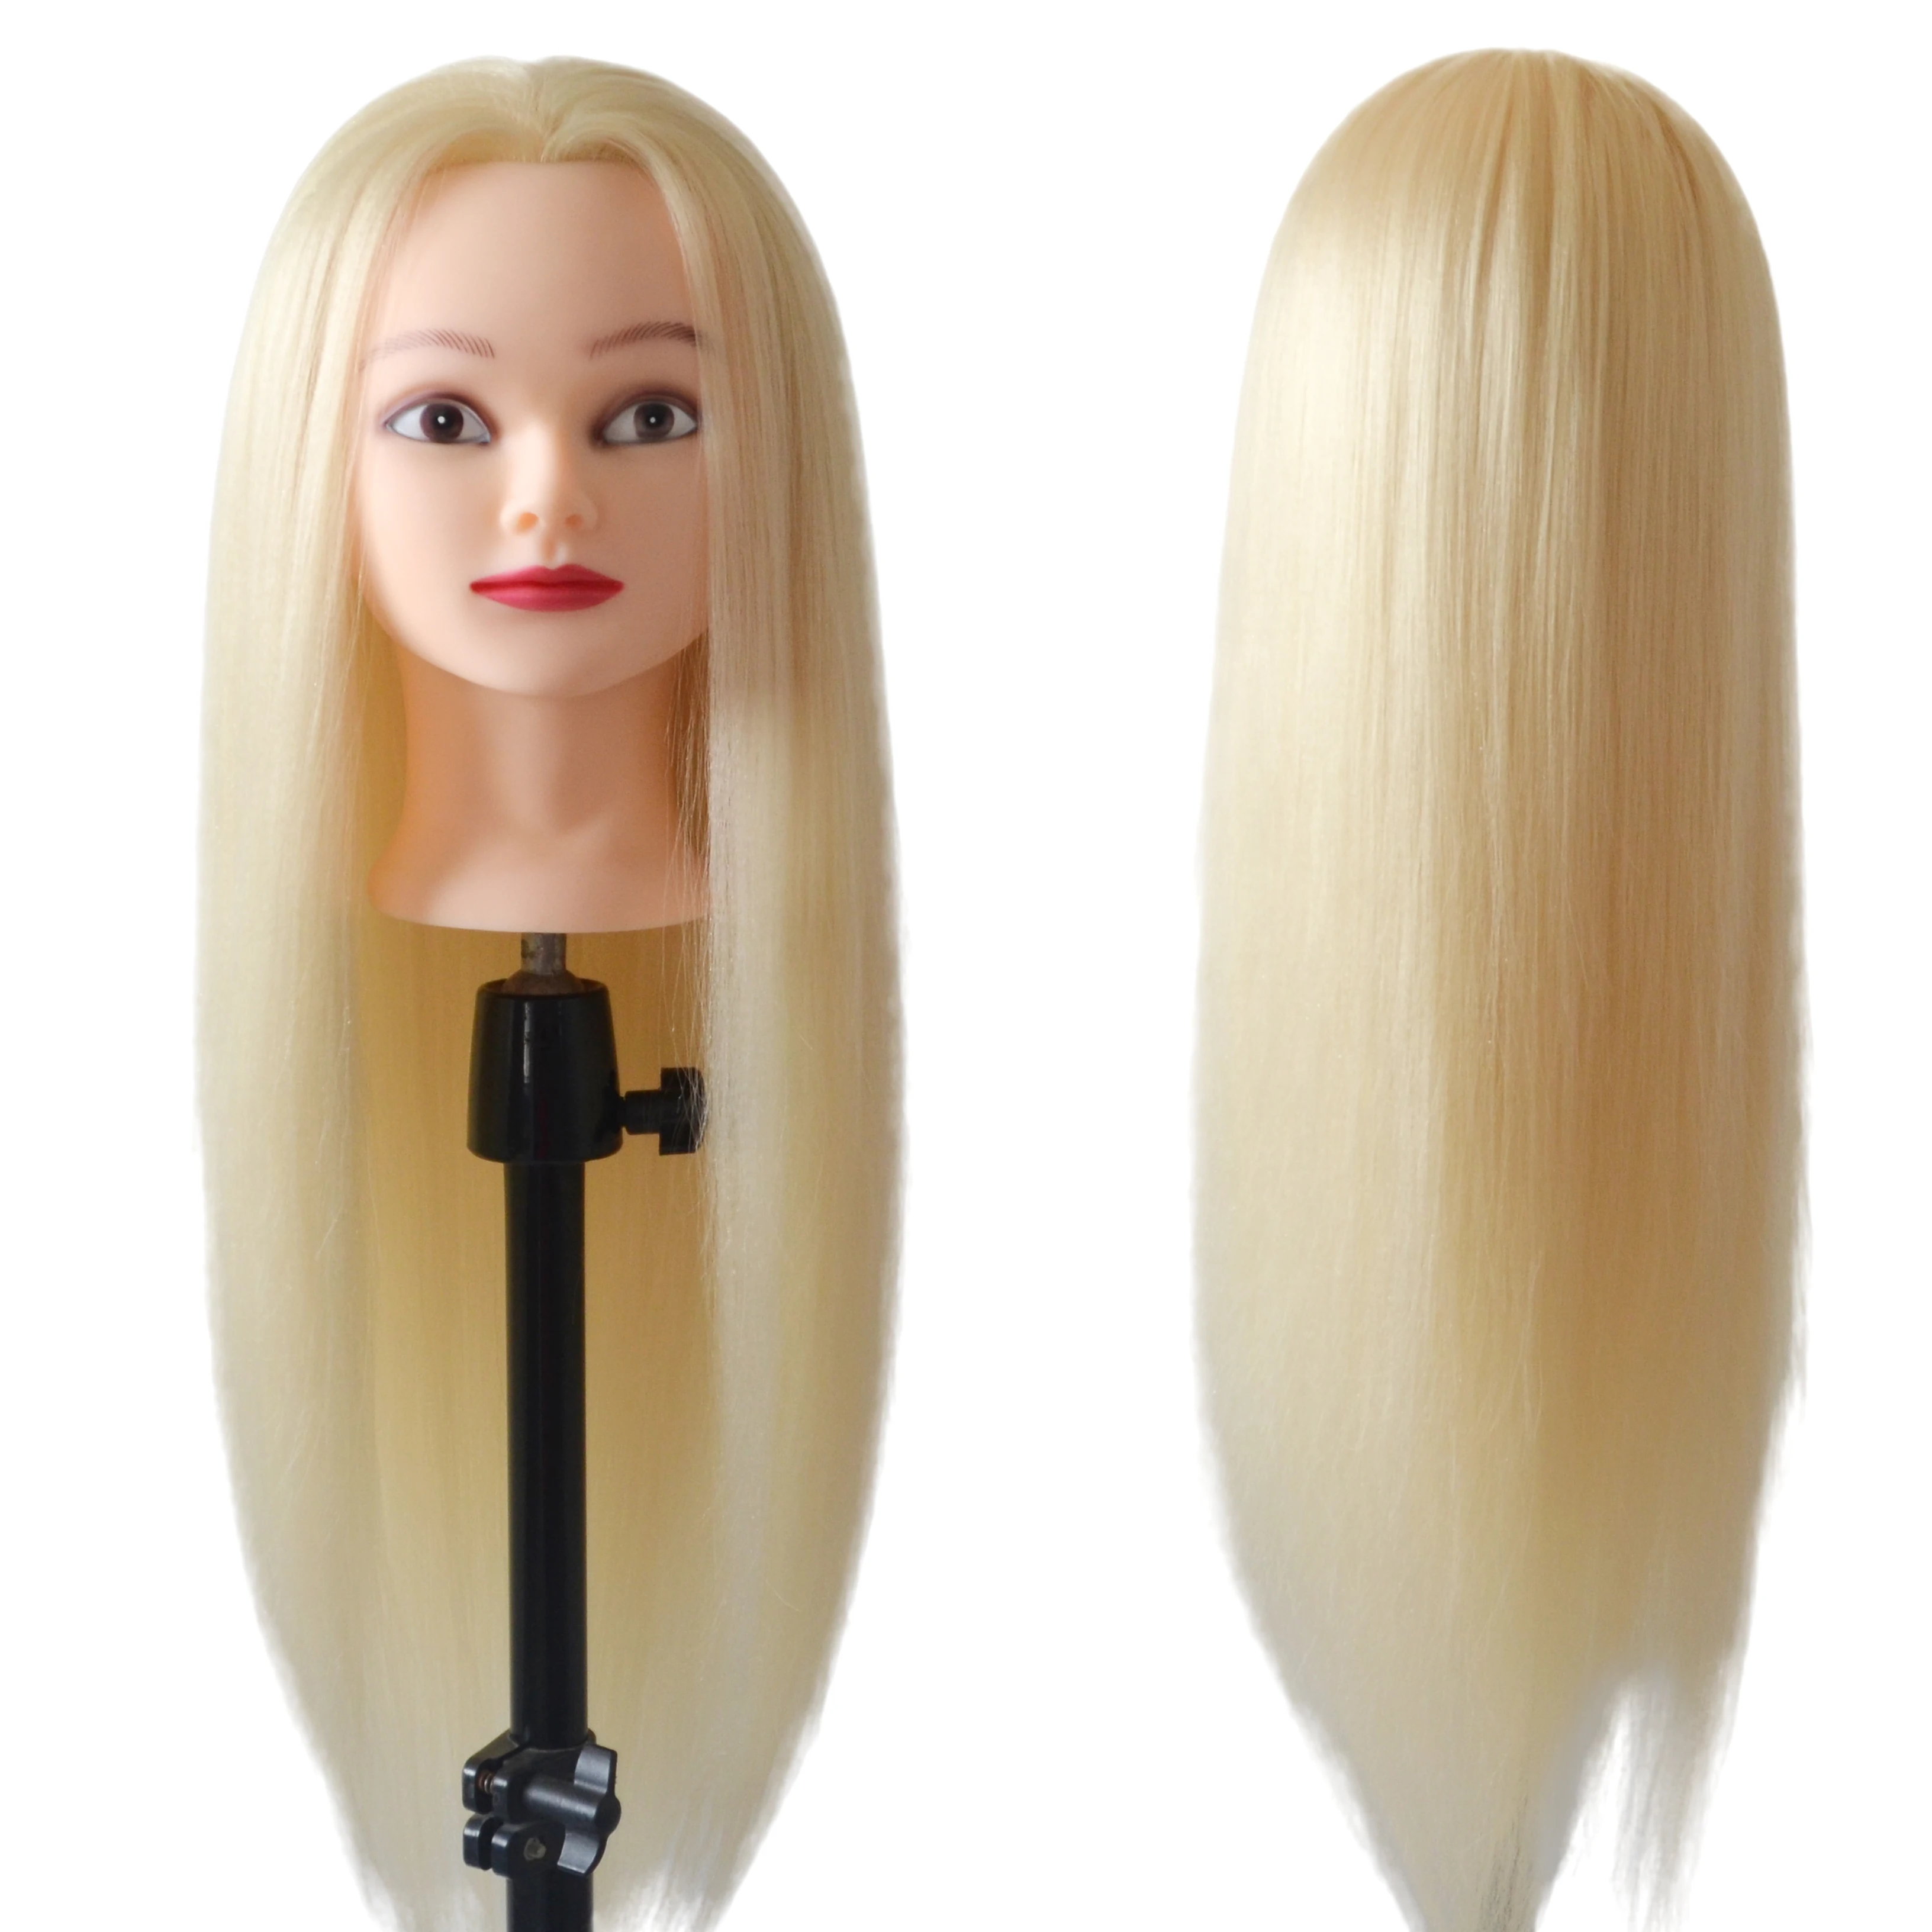 100% high temperature fiber synthetic long  white hair training mannequin head for braiding hairdo hairstyle Very nice doll head